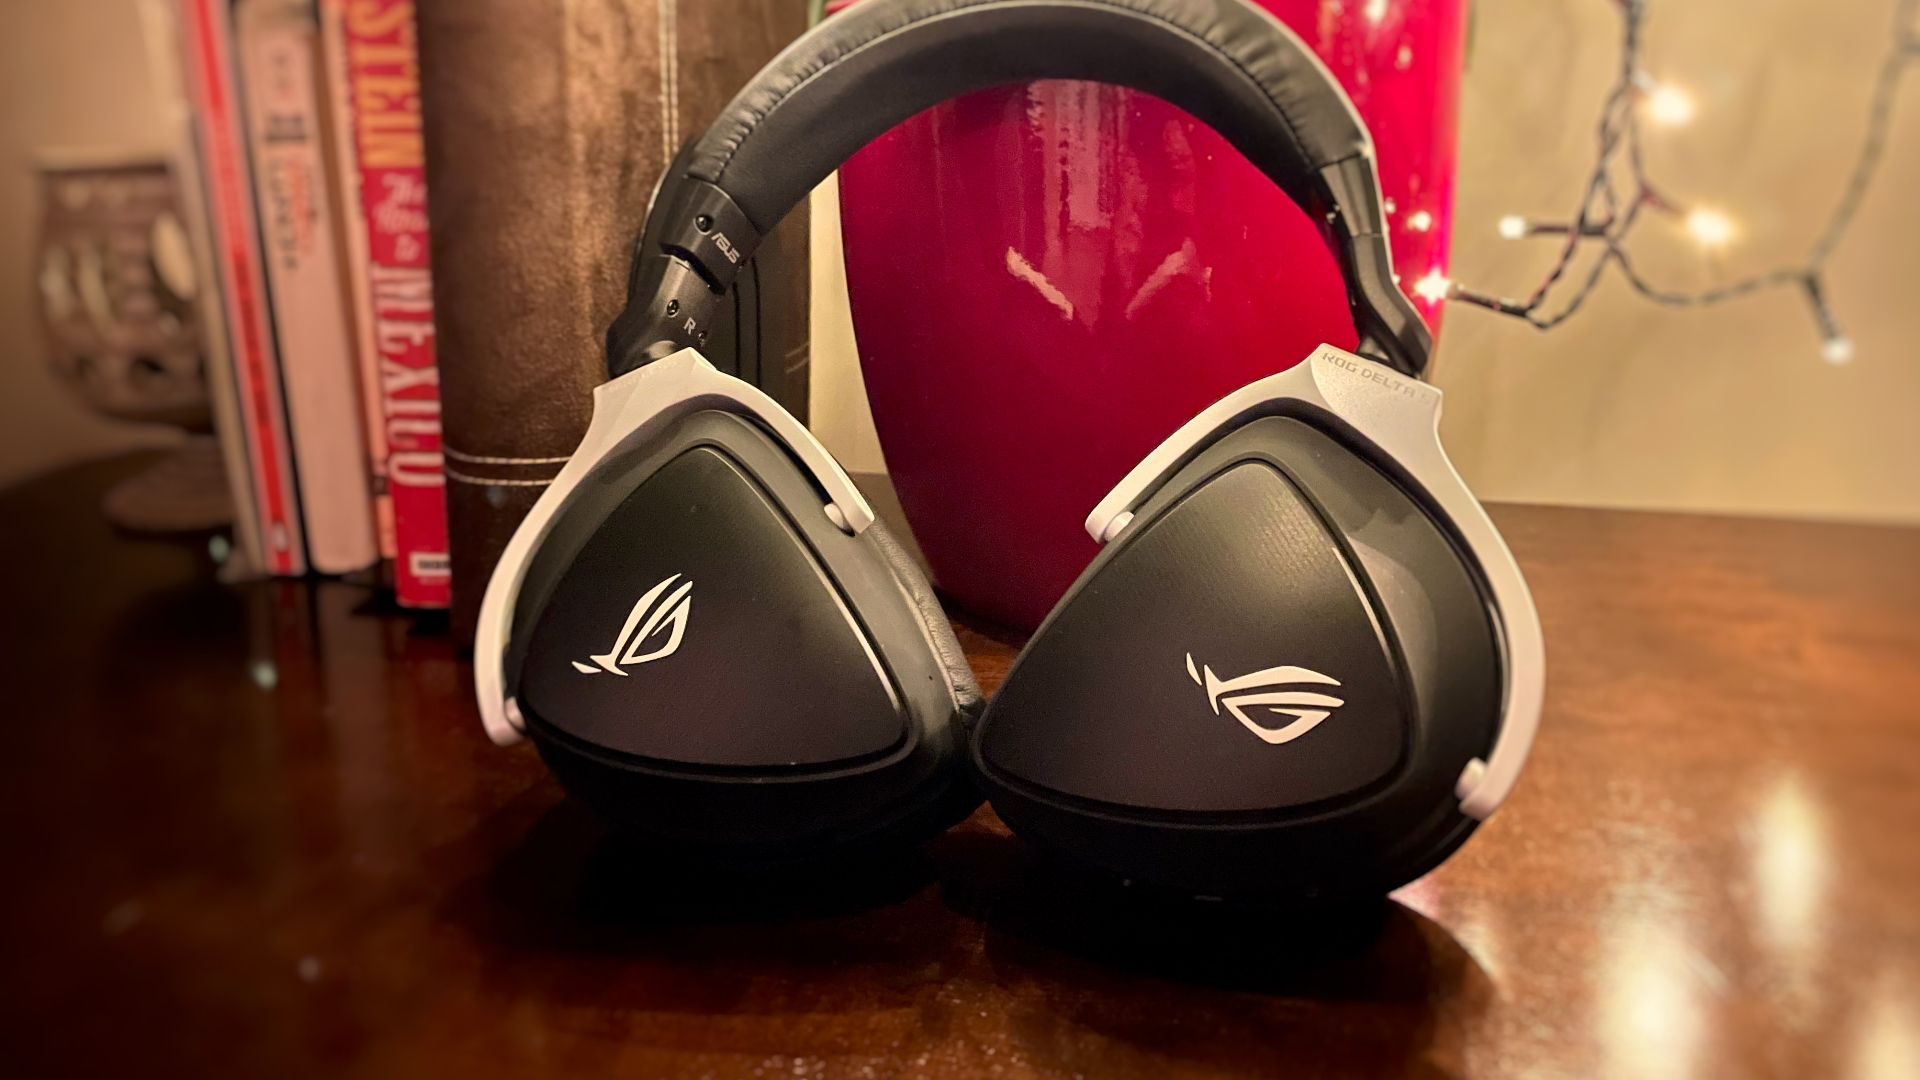 Asus ROG Delta S gaming headset review: top-notch audio for games